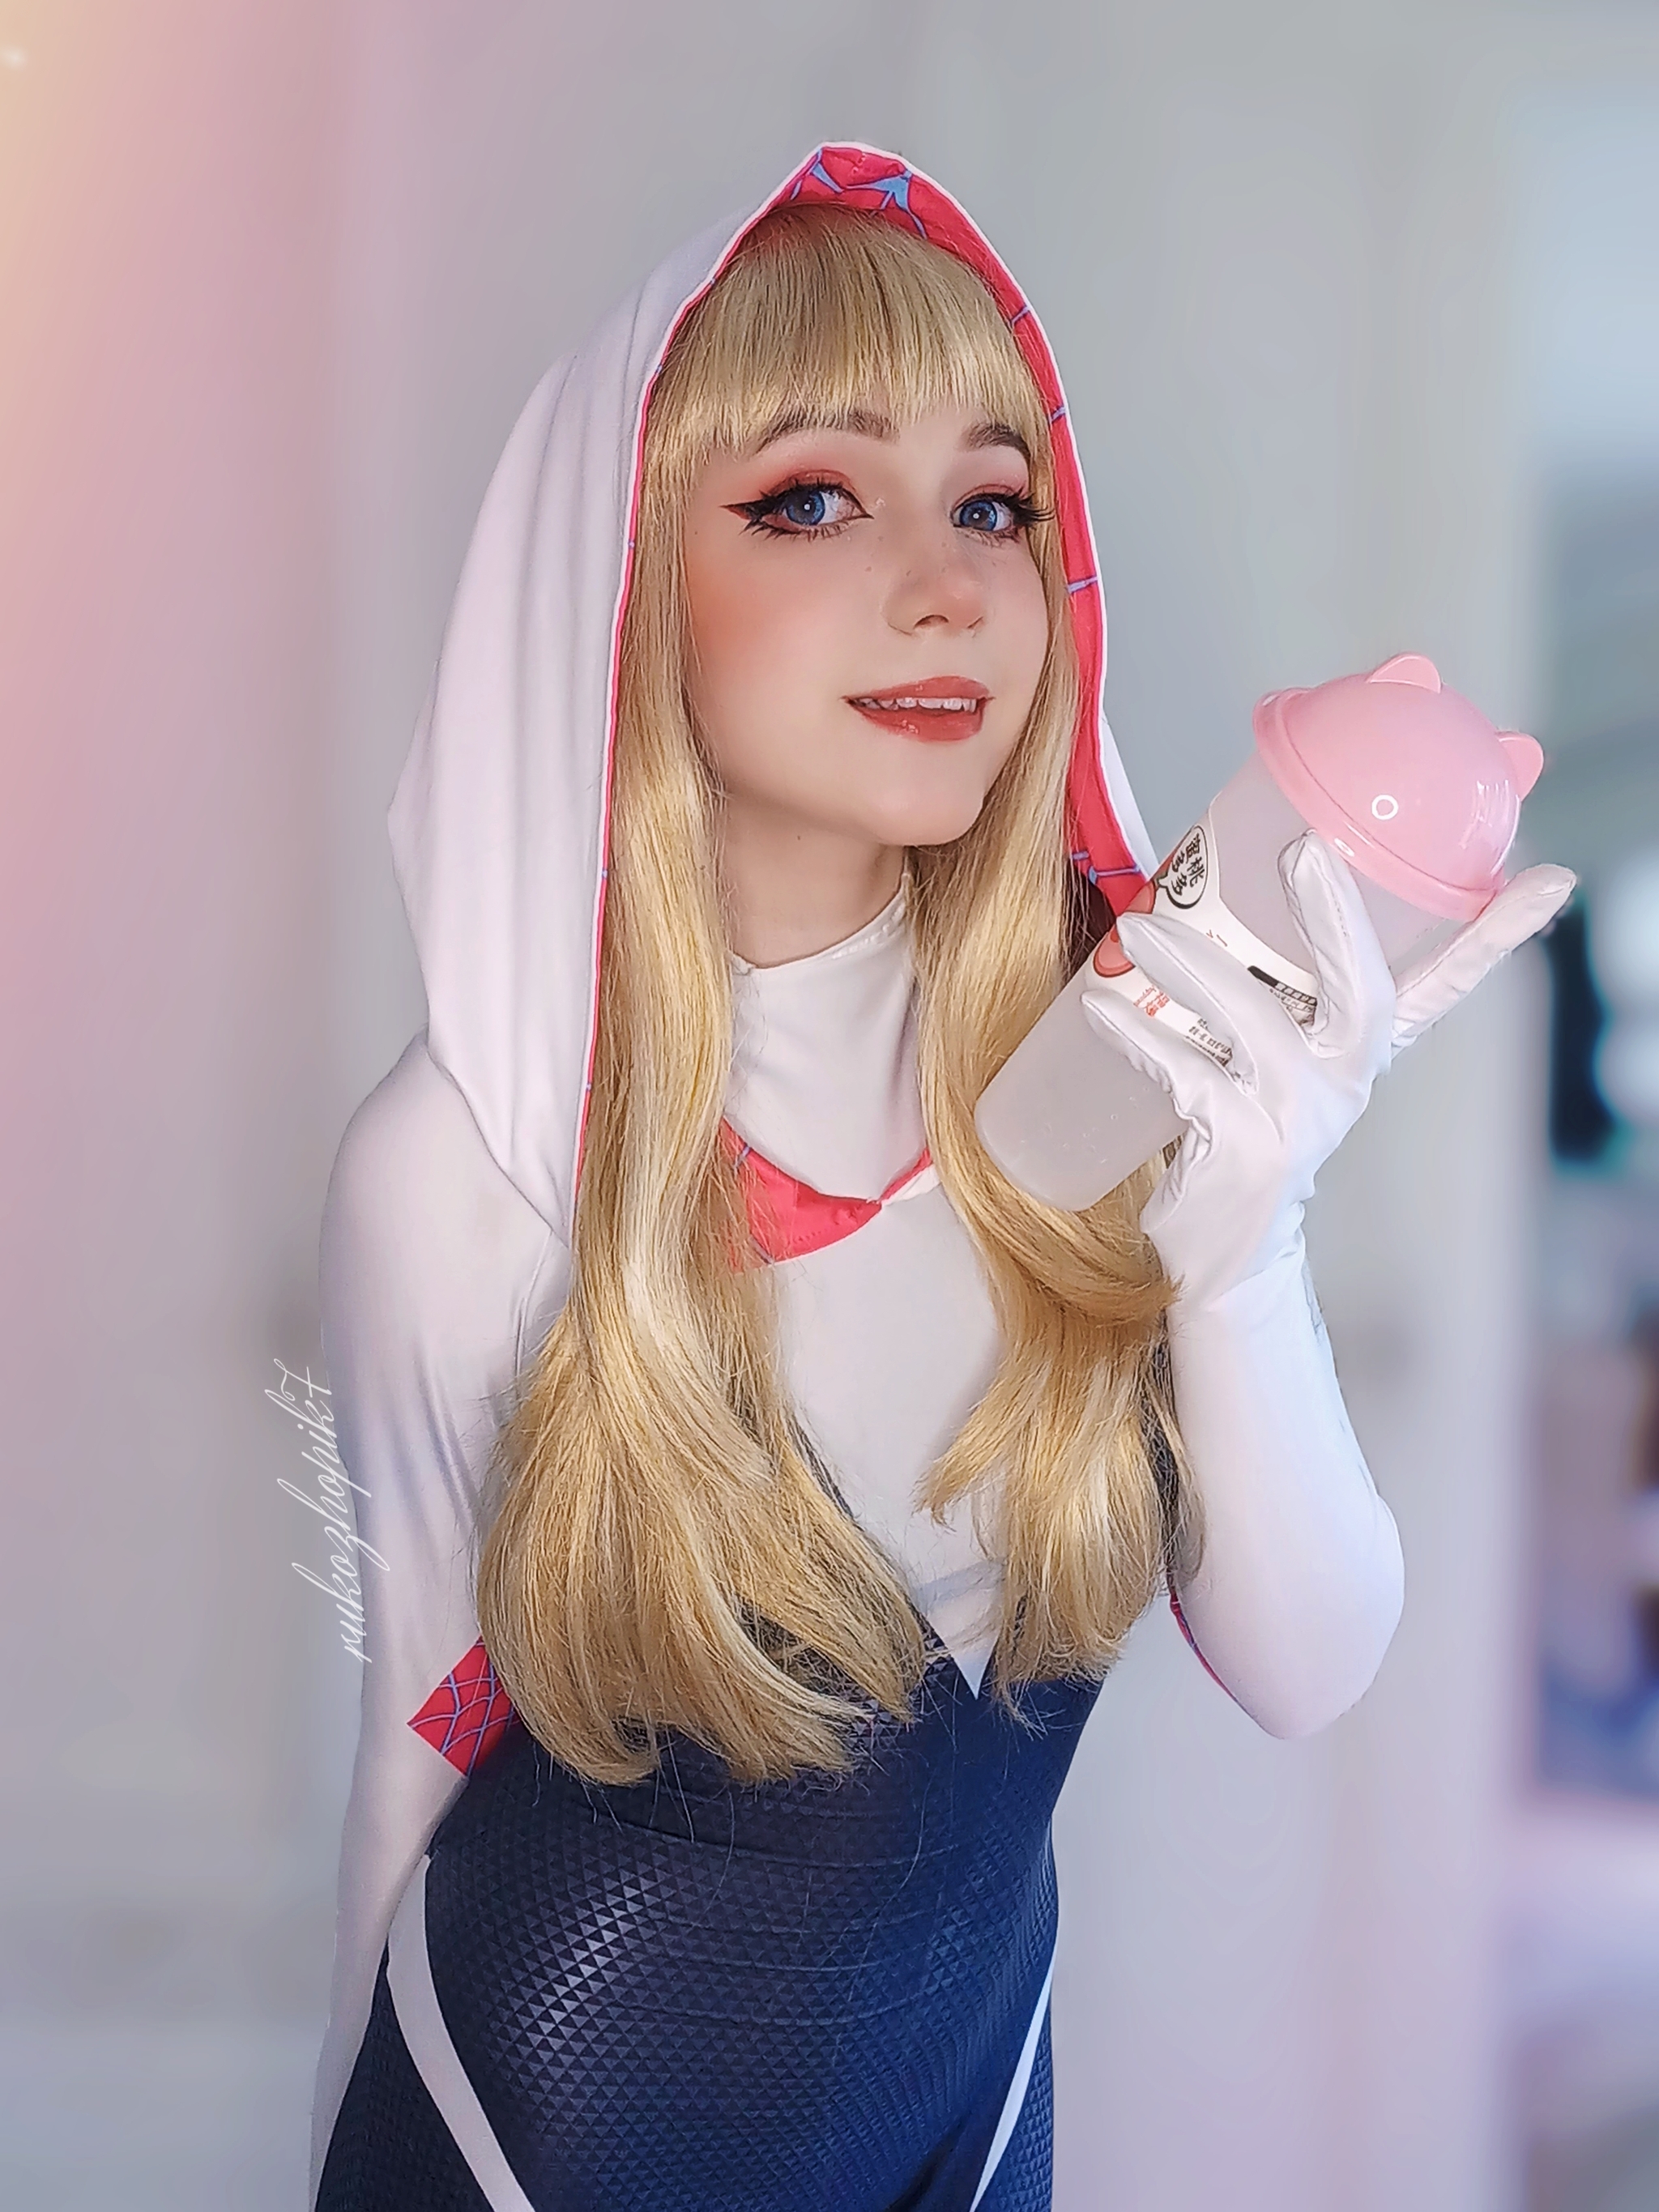 Stacy cosplay. Гвен Стейси косплей. Гвен Стейси косплеерша. Гвен Стейси косплей +18.